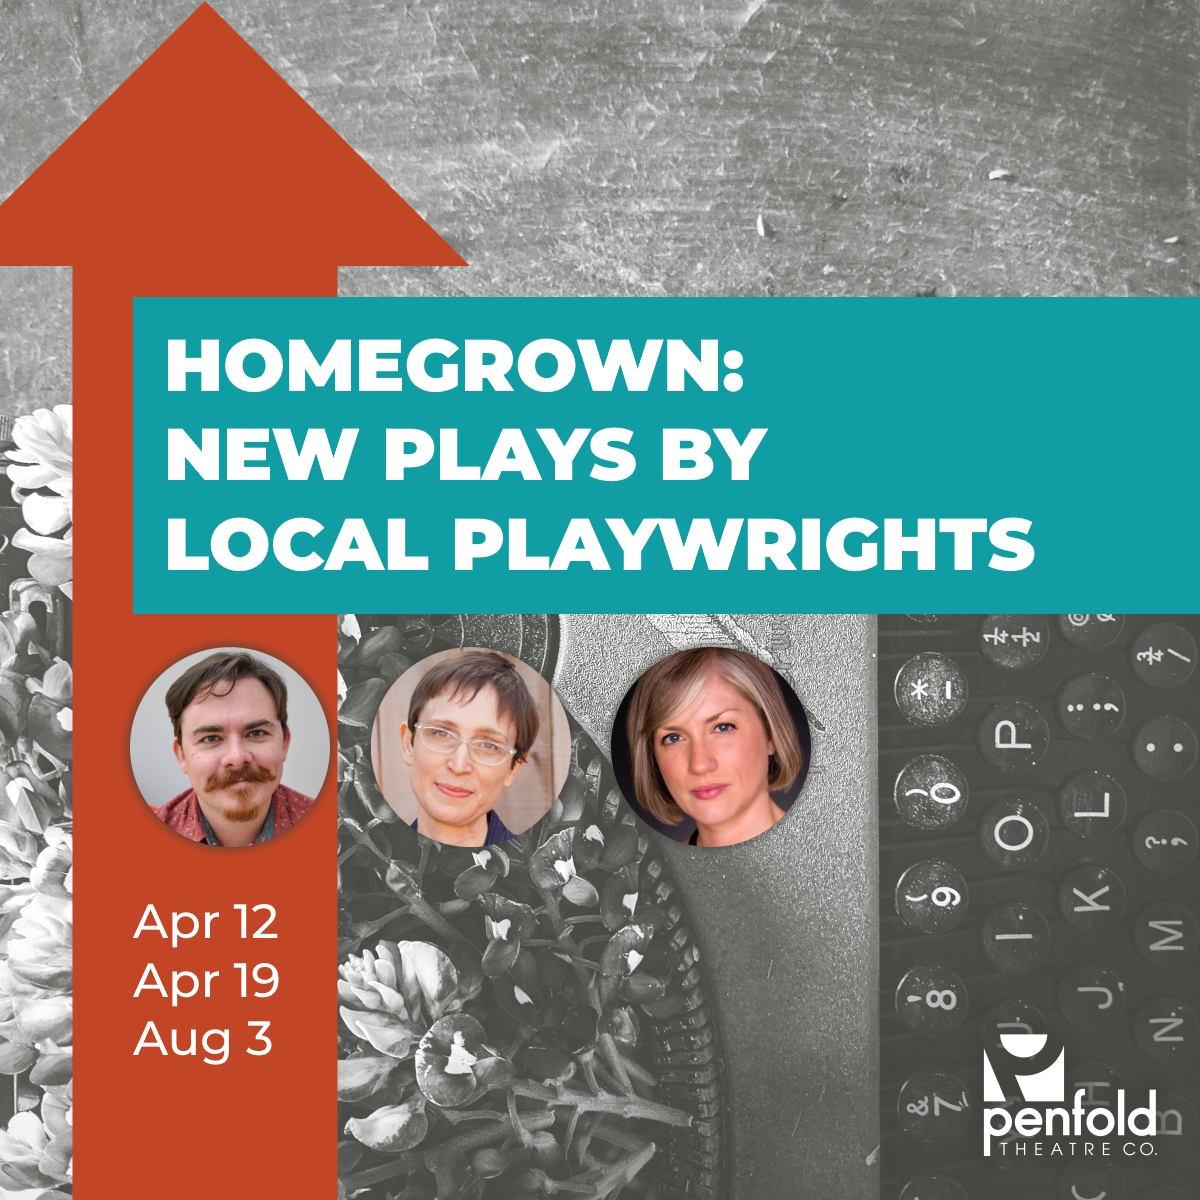 Homegrown: New Plays by Local Playwrights by Penfold Theatre Company